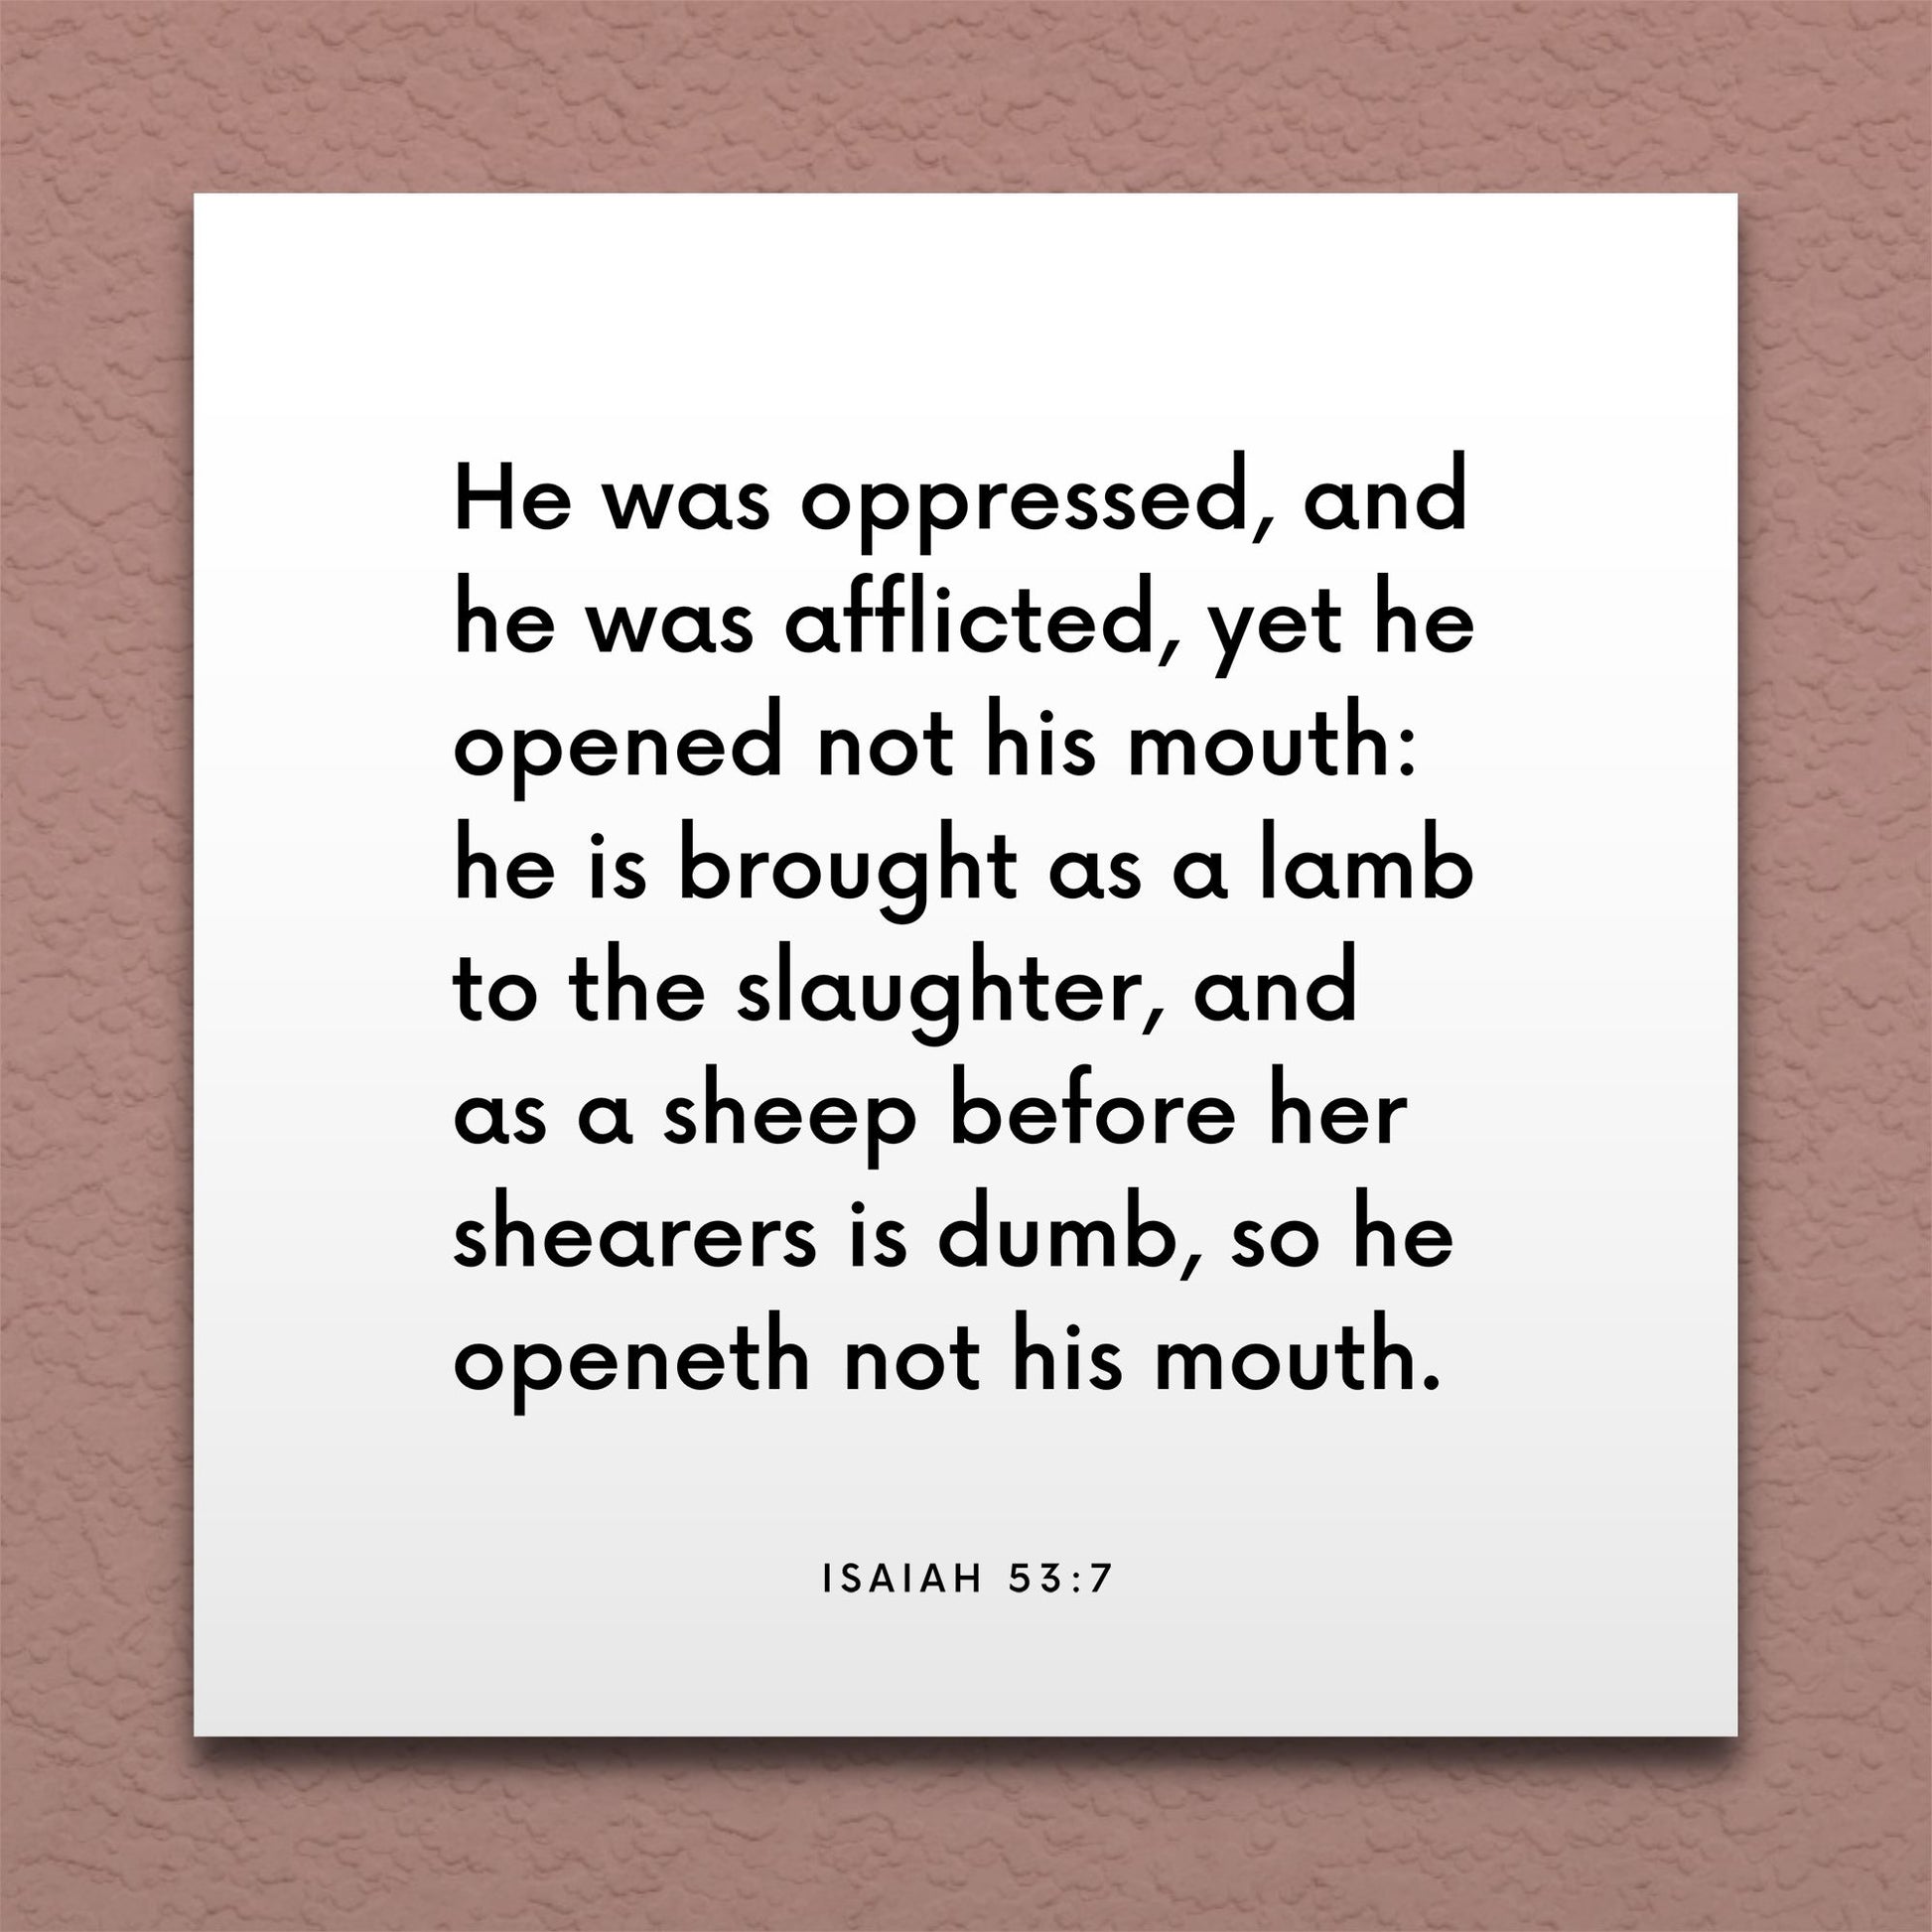 Wall-mounted scripture tile for Isaiah 53:7 - "He is brought as a lamb to the slaughter"